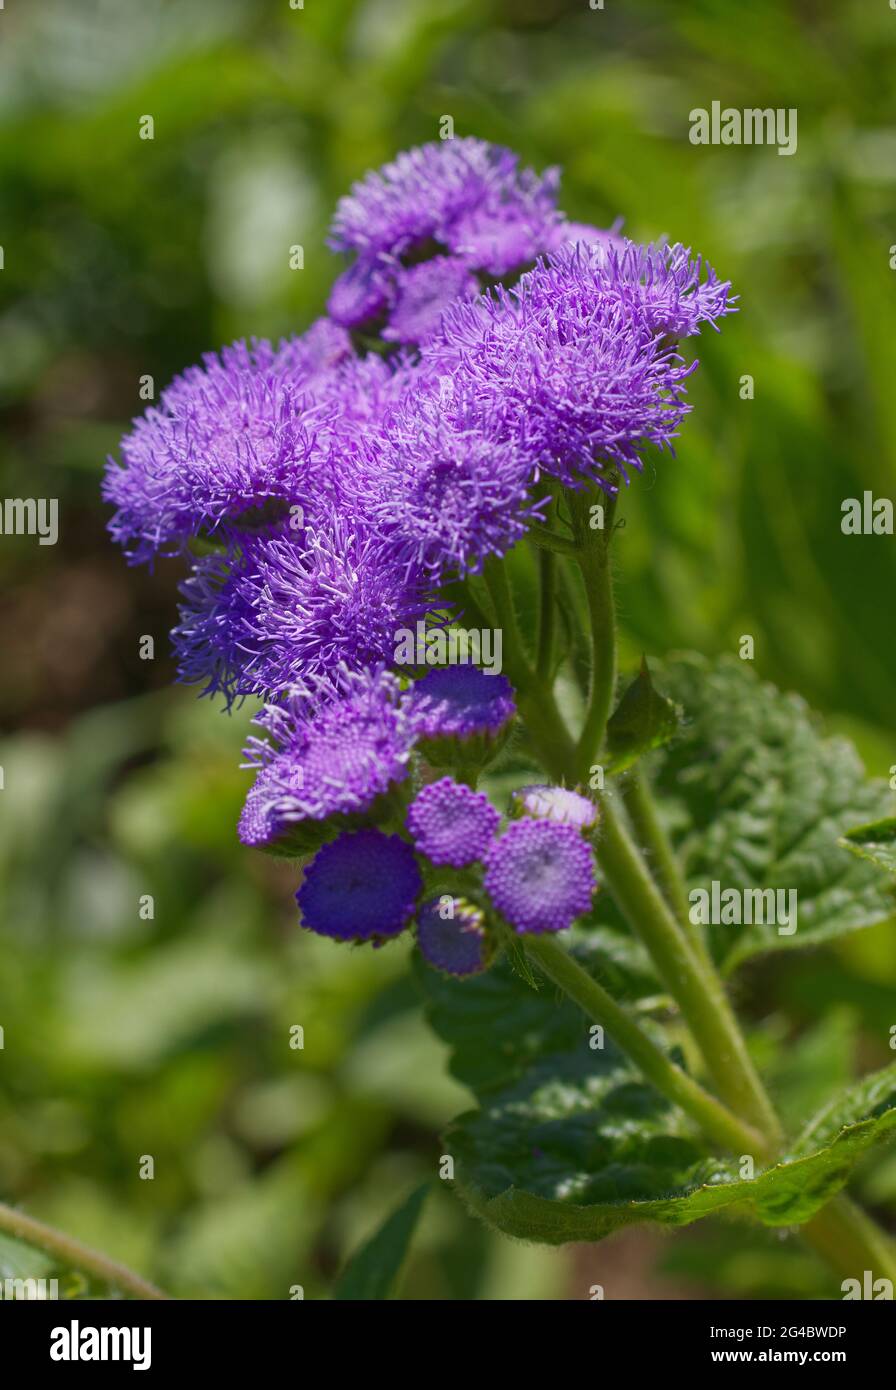 Purple blossoms of aster plant in natural habitat in park. Stock Photo